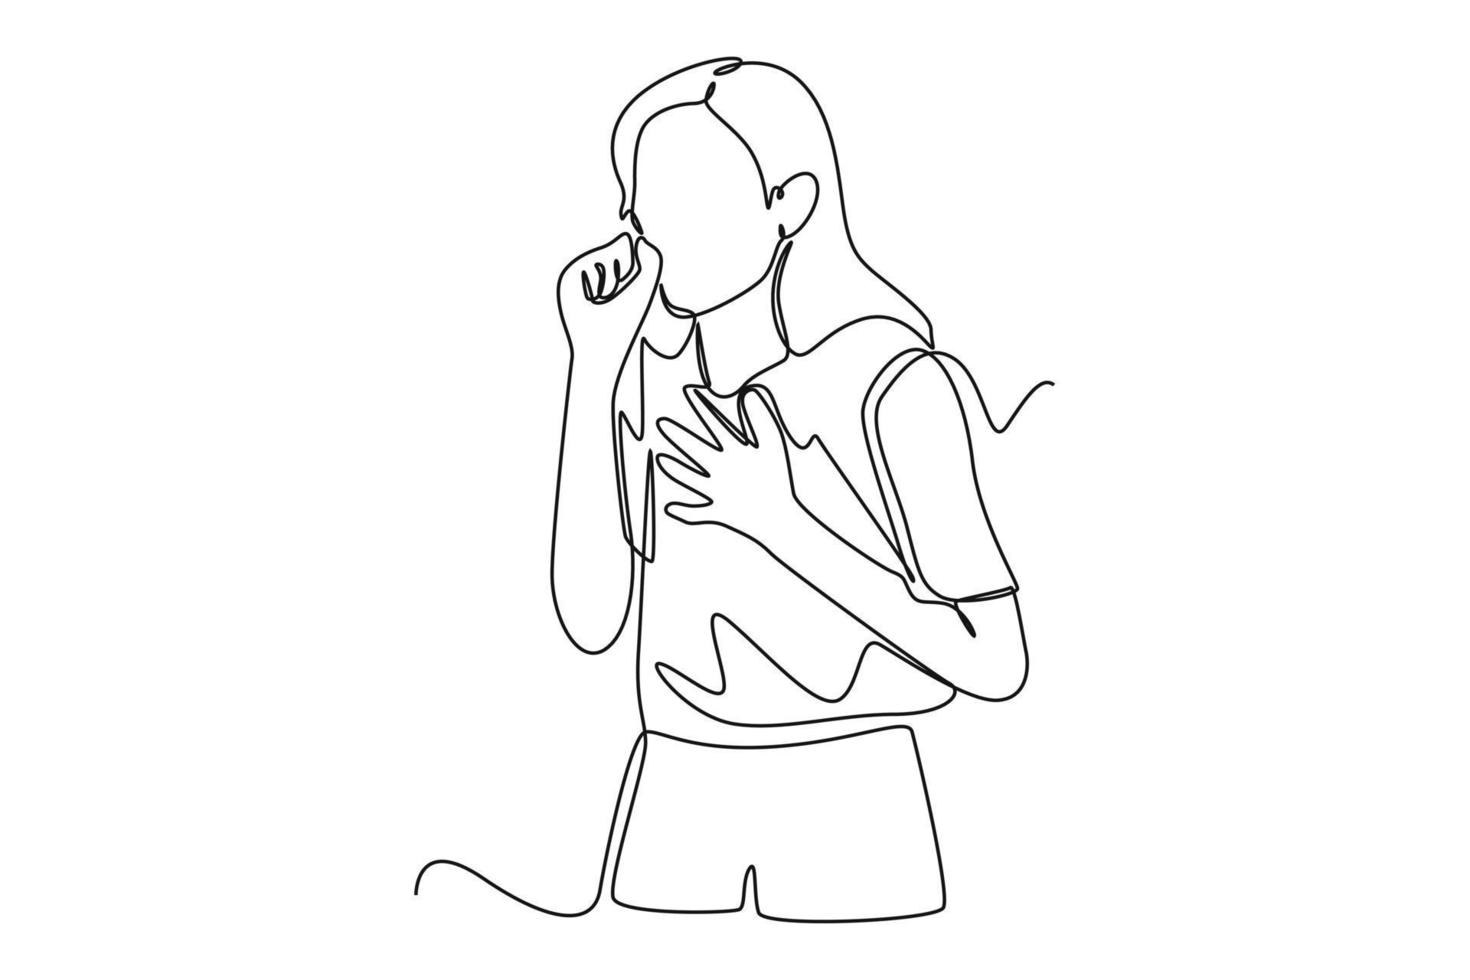 Single one line drawing Sick woman coughing over his hand. Sick people concept. Continuous line draw design graphic vector illustration.